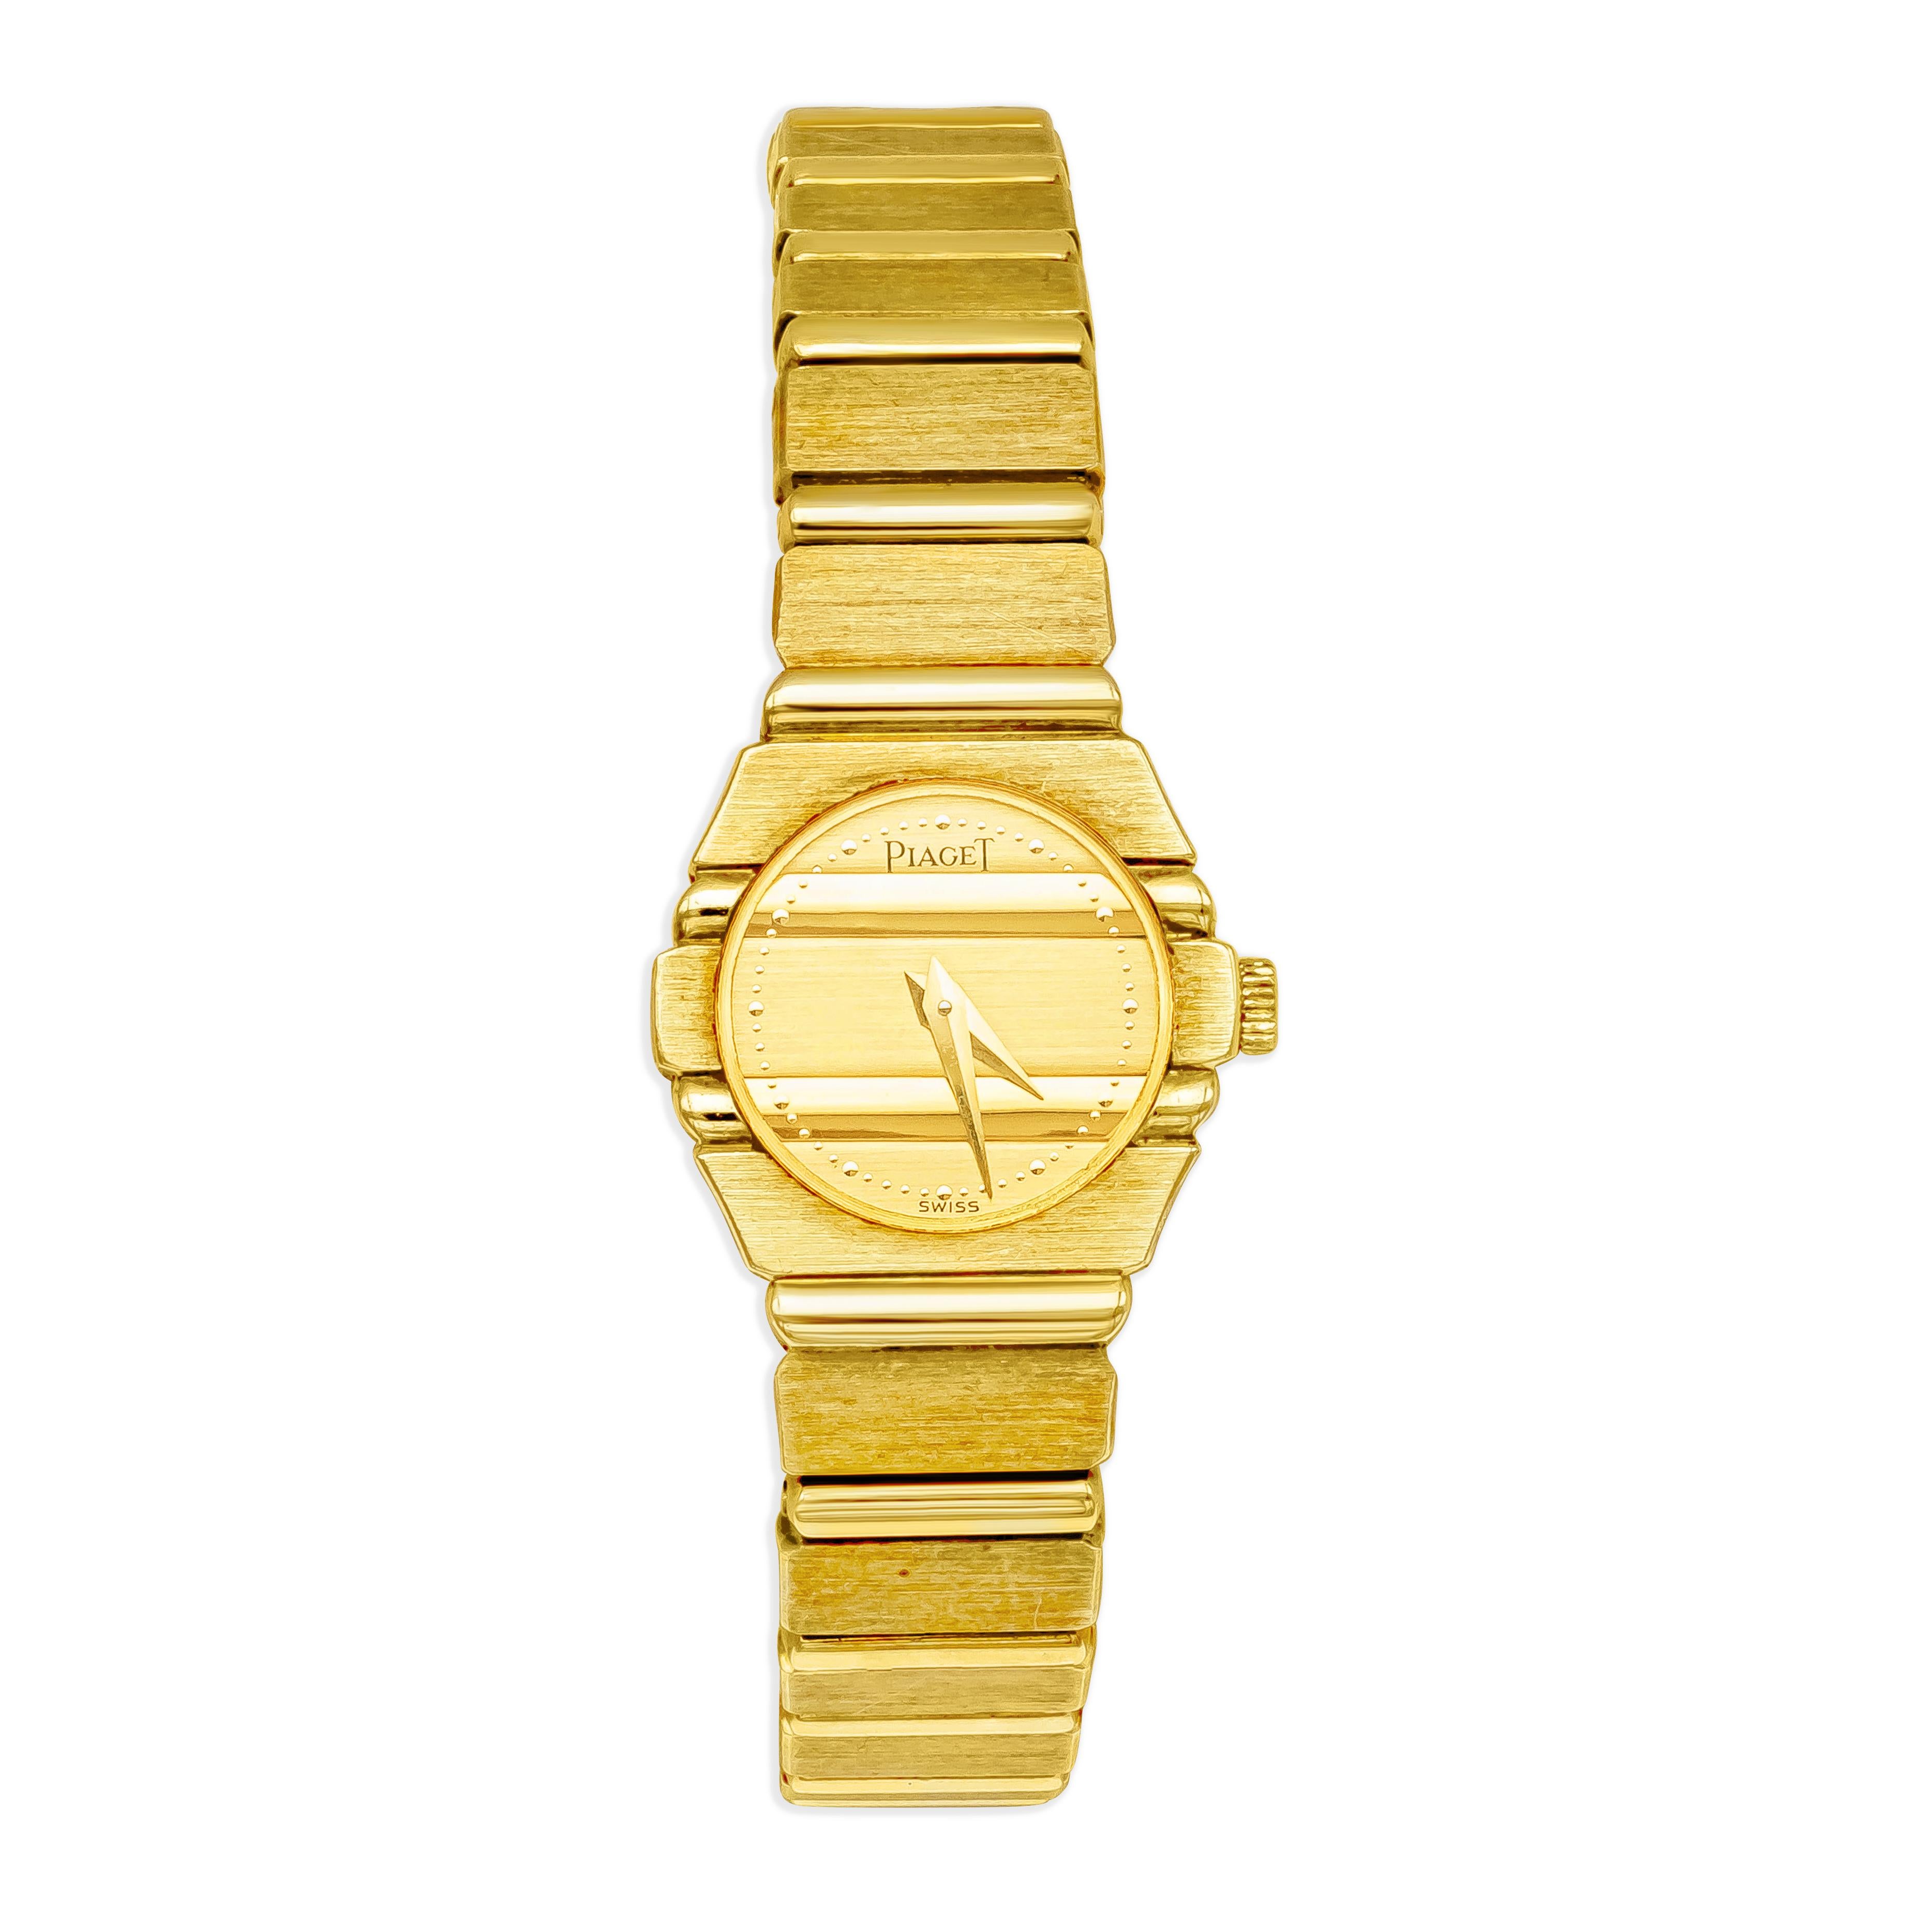 A classic and elegant Piaget Polo ladies wristwatch in Quartz. Ref 841 C701. Small 19 mm case with a round caseback and gold no marker dial. Made out of 18K yellow gold on a gold link band with an 18K tang buckle. Certified pre-owned Piaget watch.